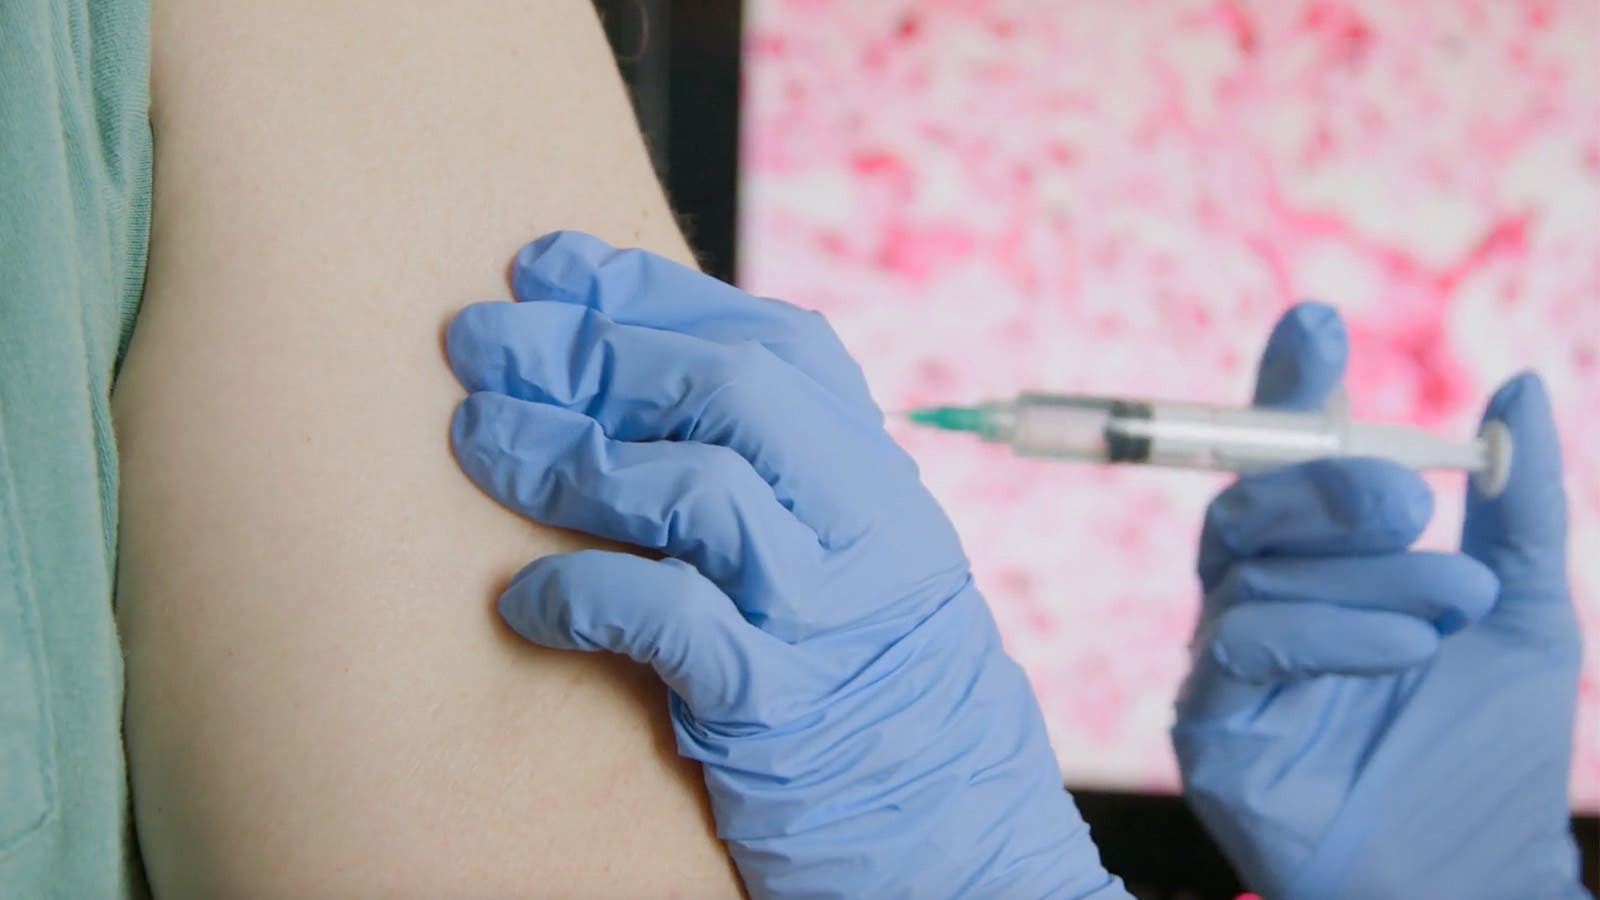 Why Measles Retains Popping Up in Pockets of the U.S.